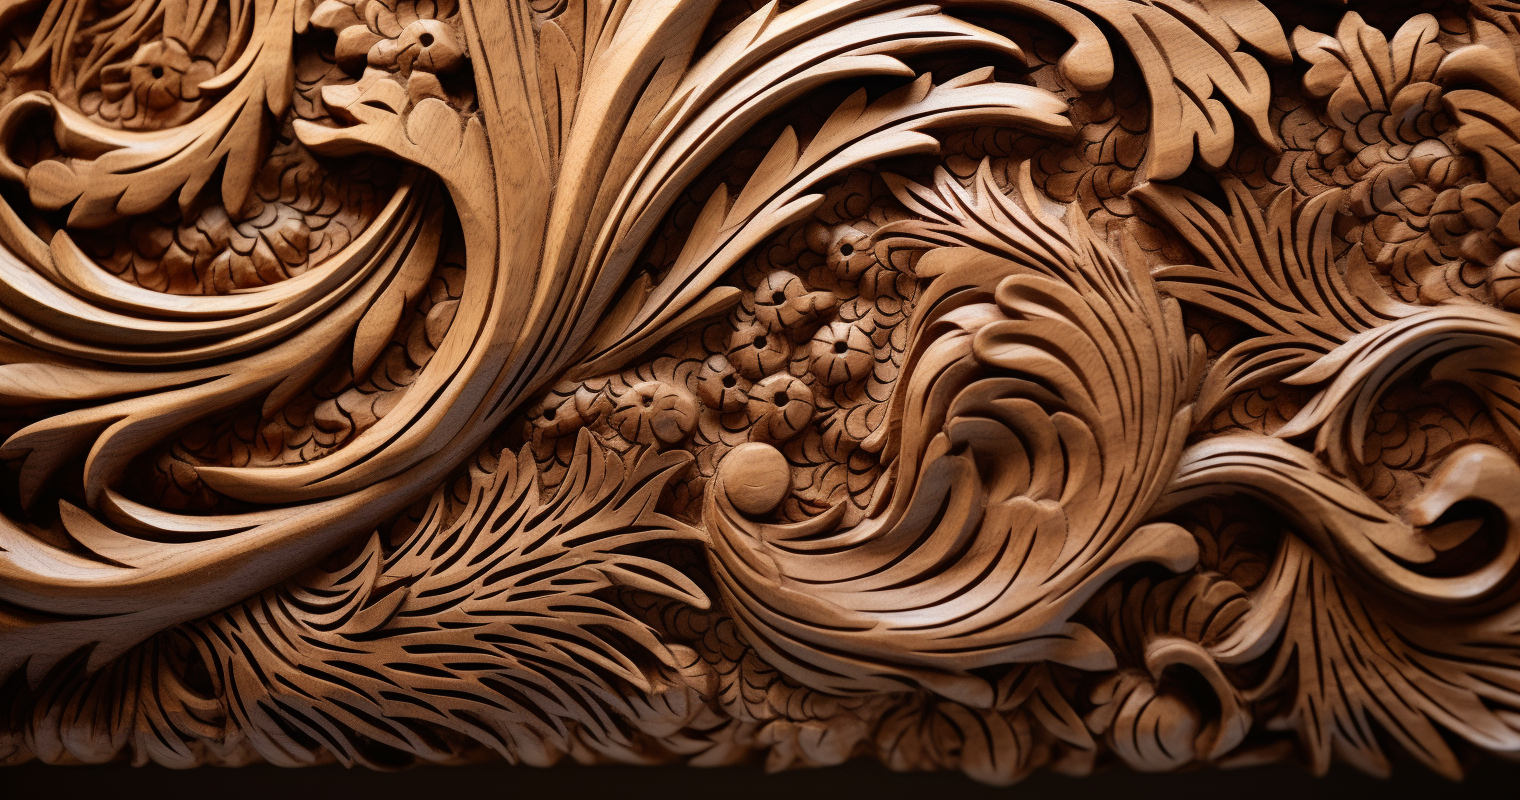 Artistry in Detail Hand-Carved Wooden Sculpture